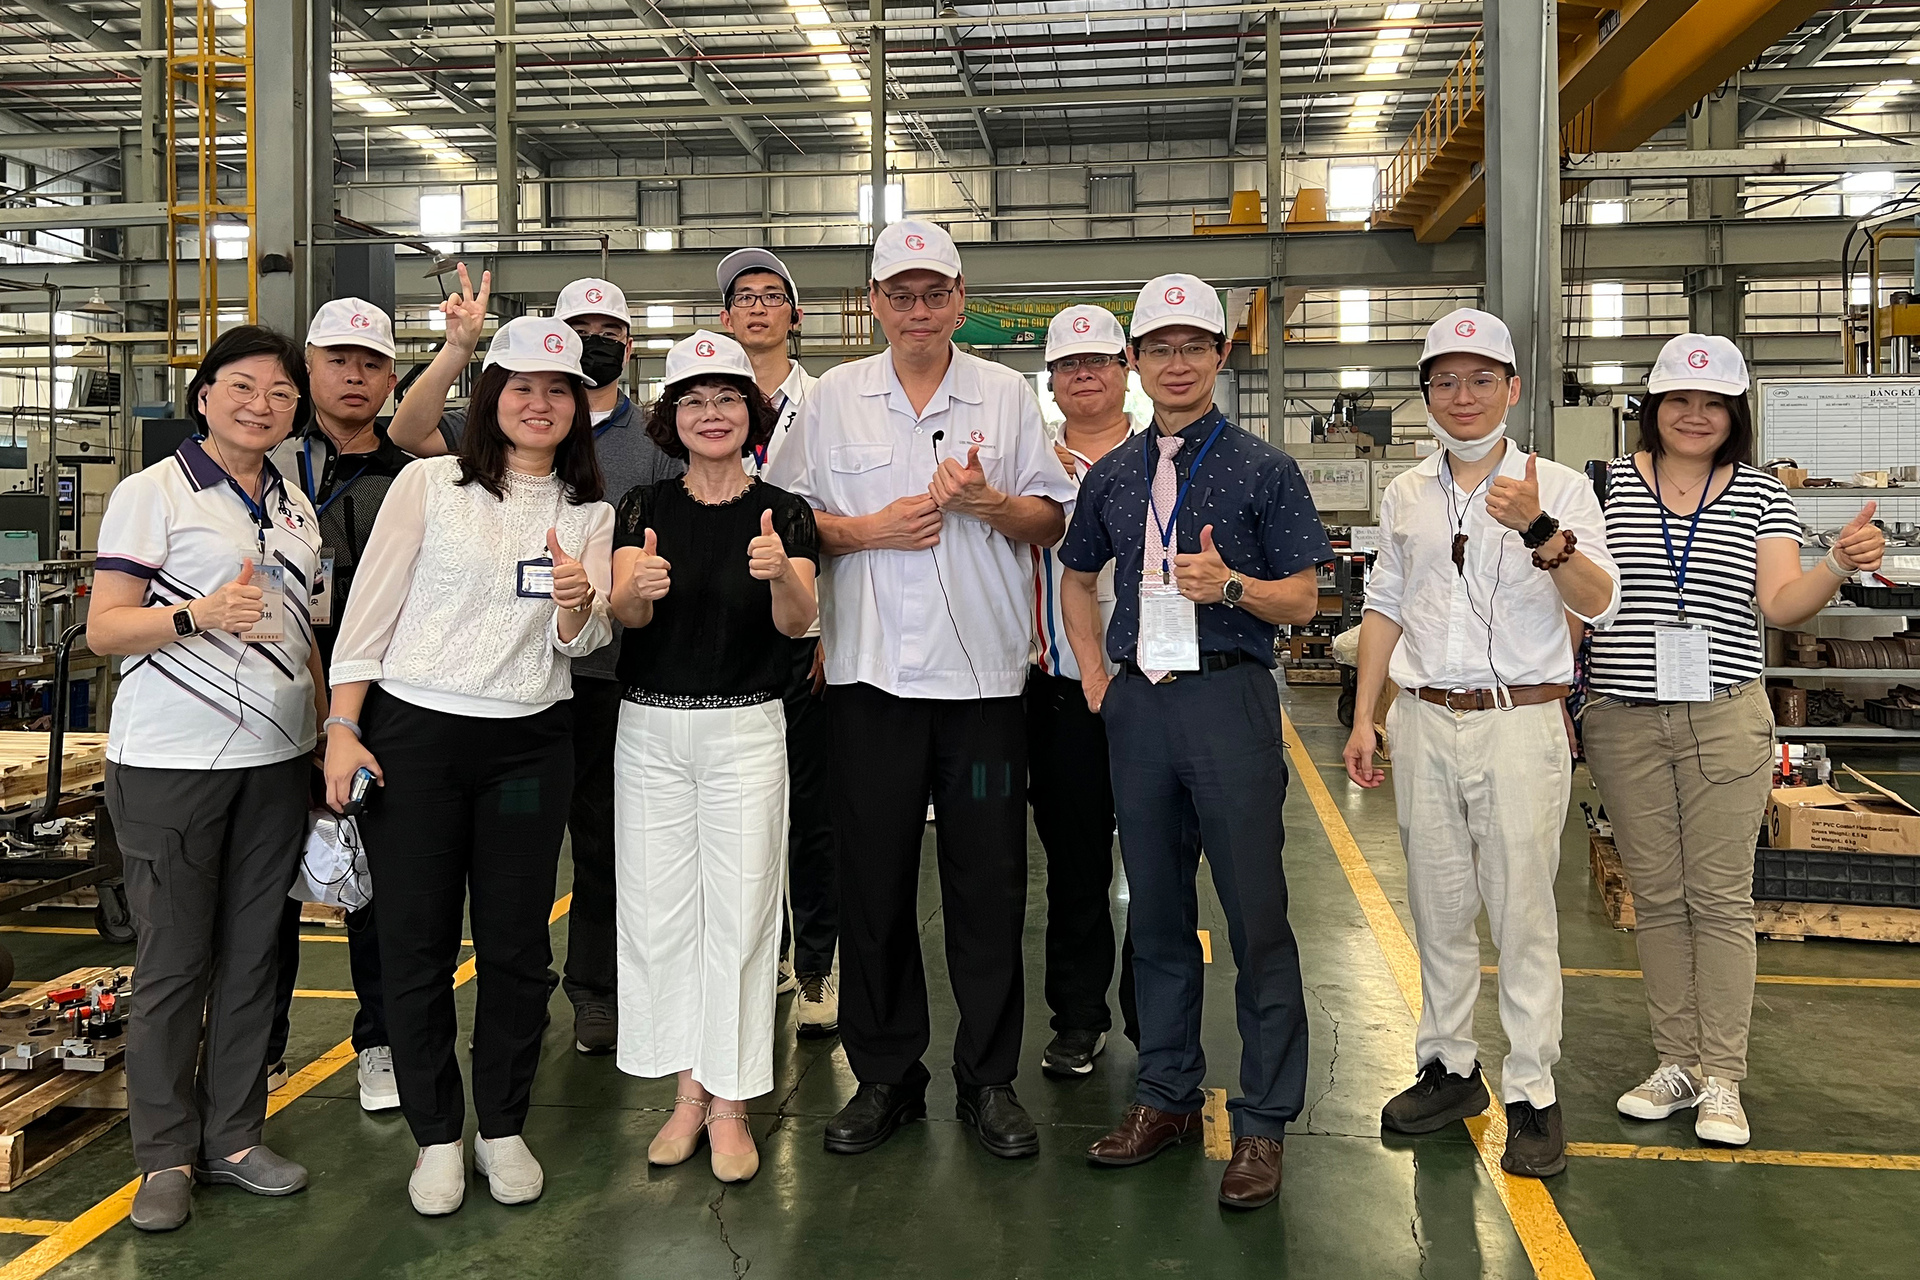 President of NUK, Yueh-Tuan Chen (the 3rd one from left in the front row) visited alumni enterprises in Vietnam